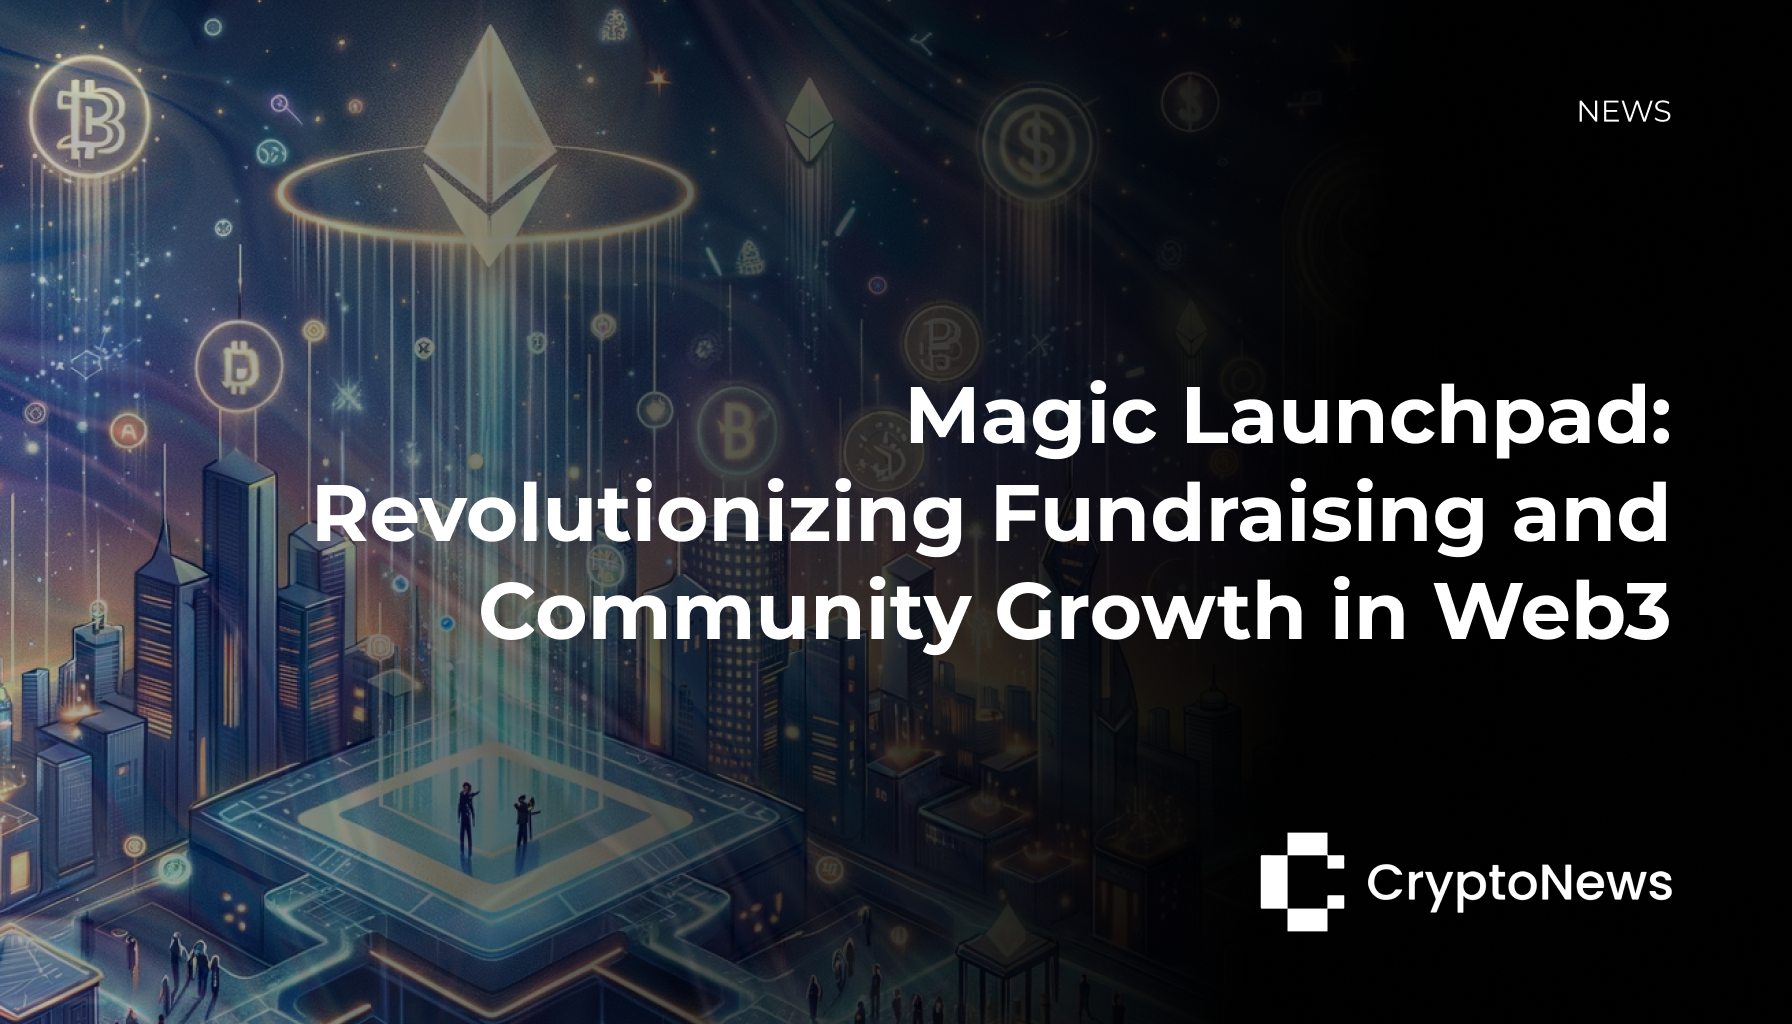 Magic Launchpad: Revolutionizing Fundraising and Community Growth in Web3 - Futuristic cityscape with digital elements representing blockchain and Web3 technologies.